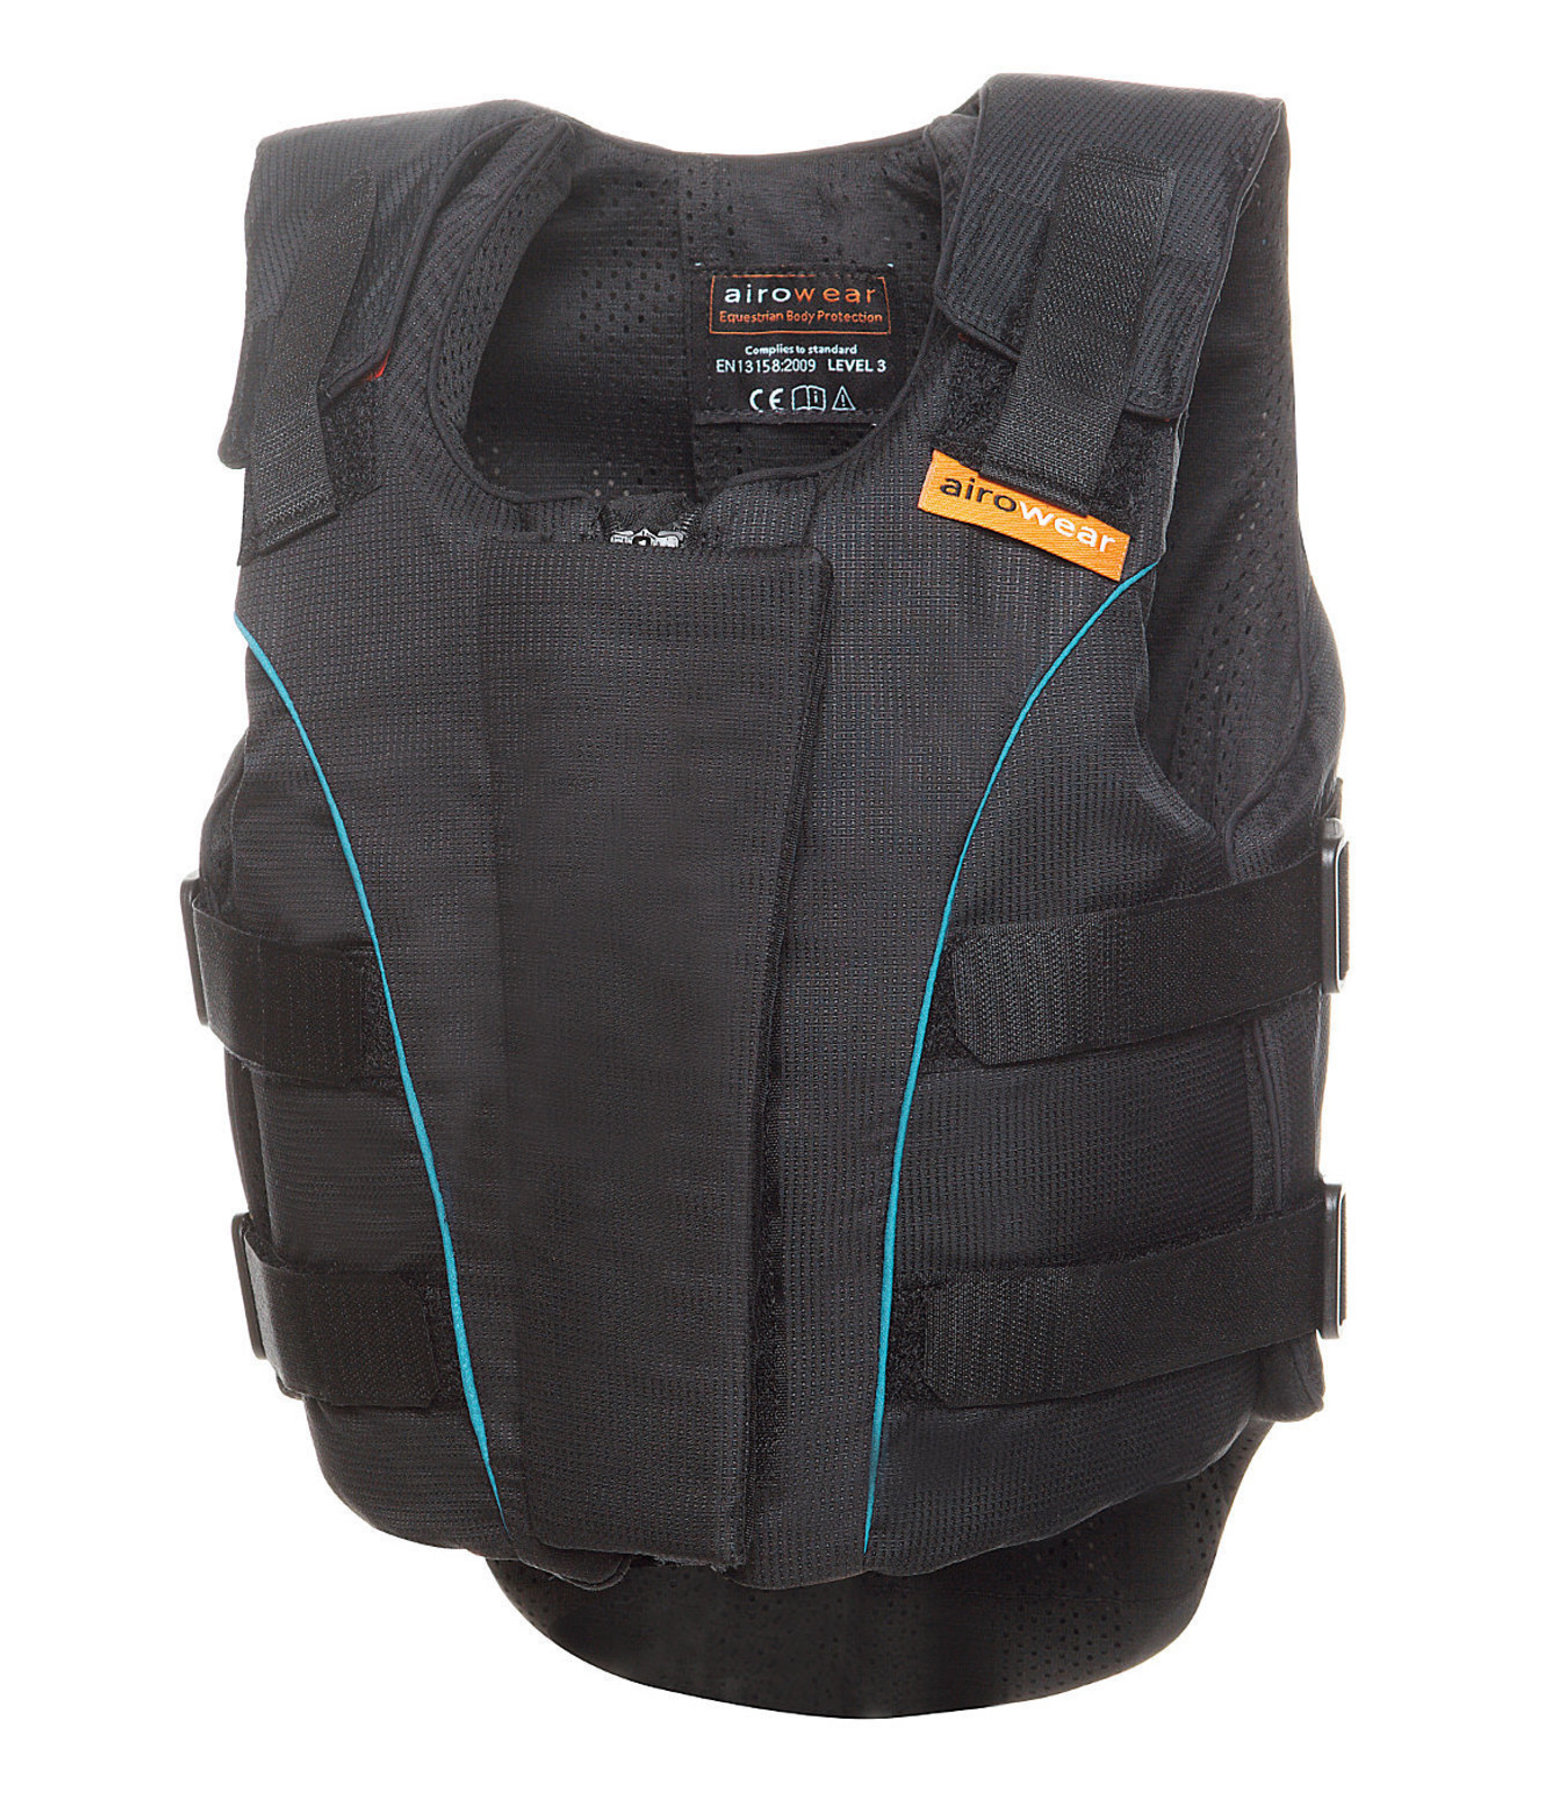 Children's Body Protector Outlyne